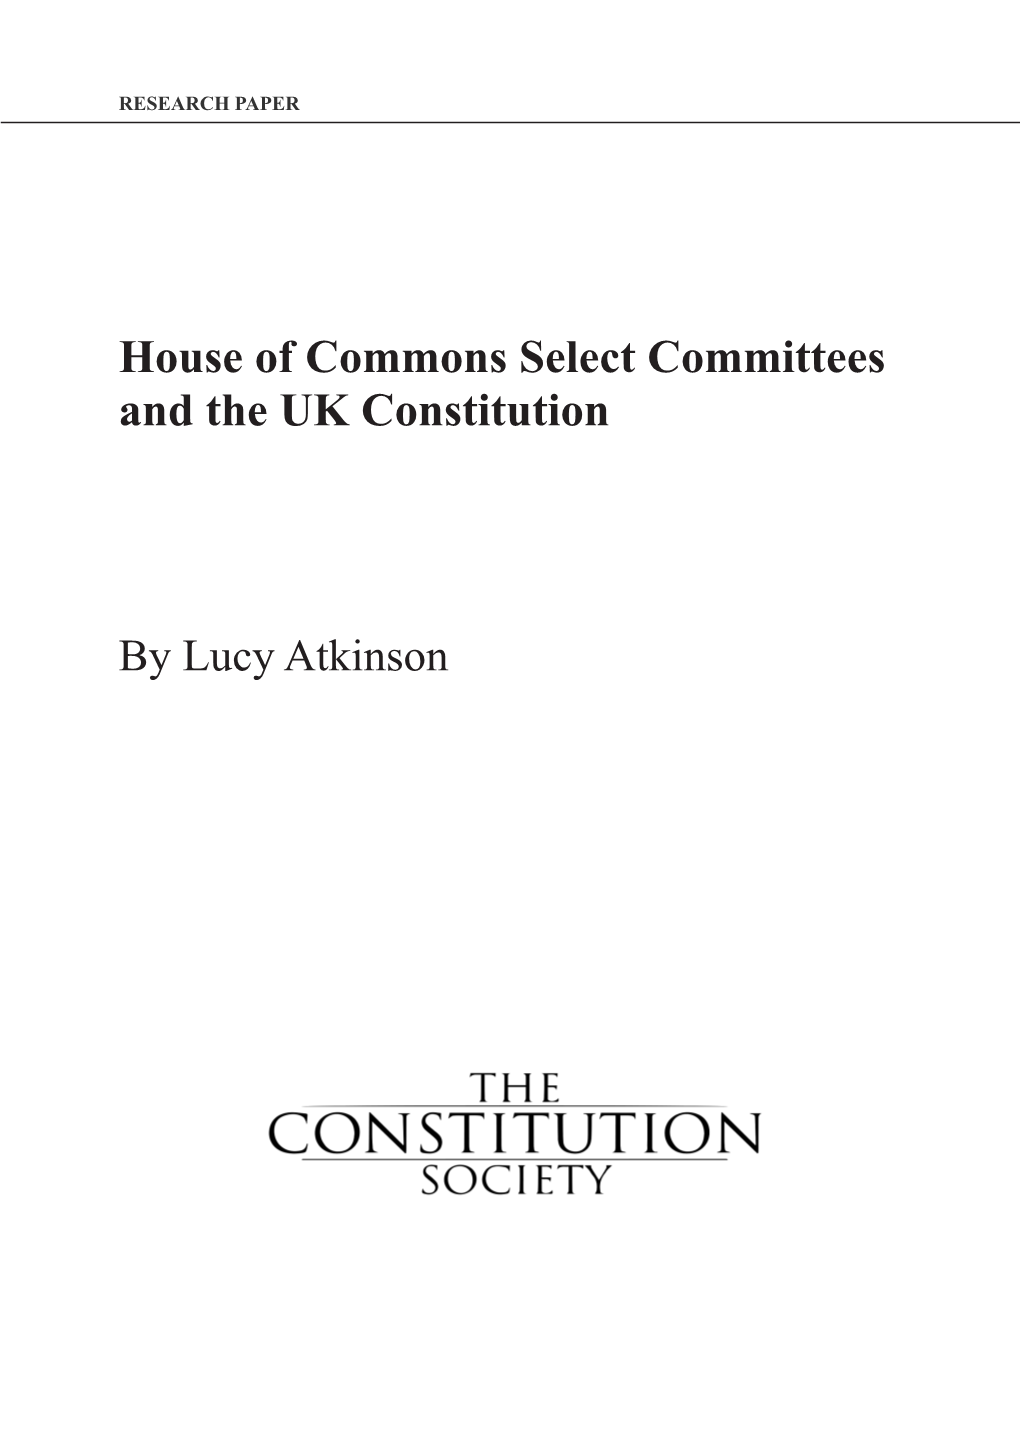 House of Commons Select Committees and the UK Constitution